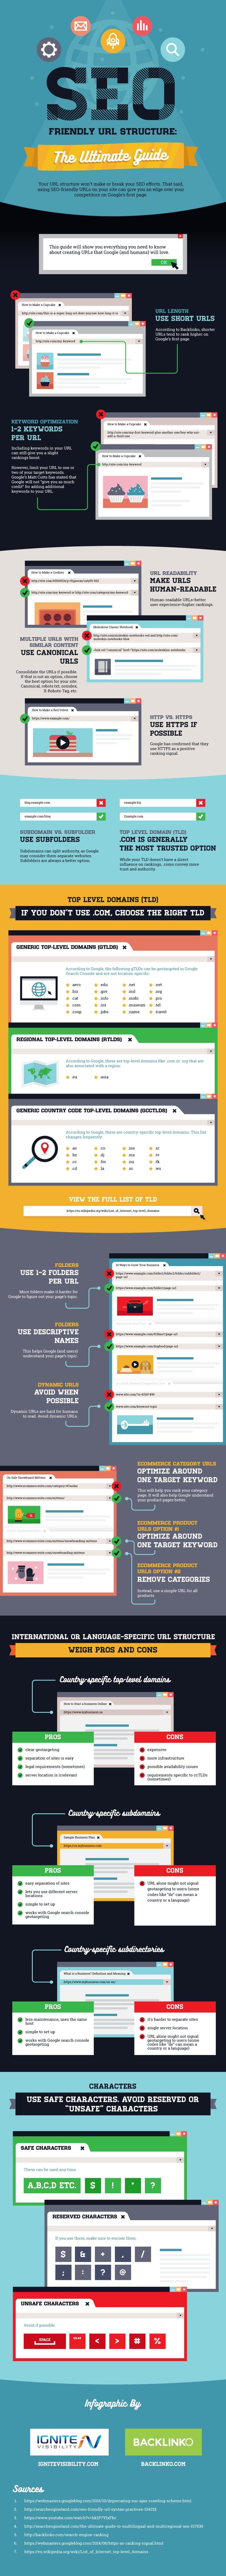 SEO URL-Structure infographic